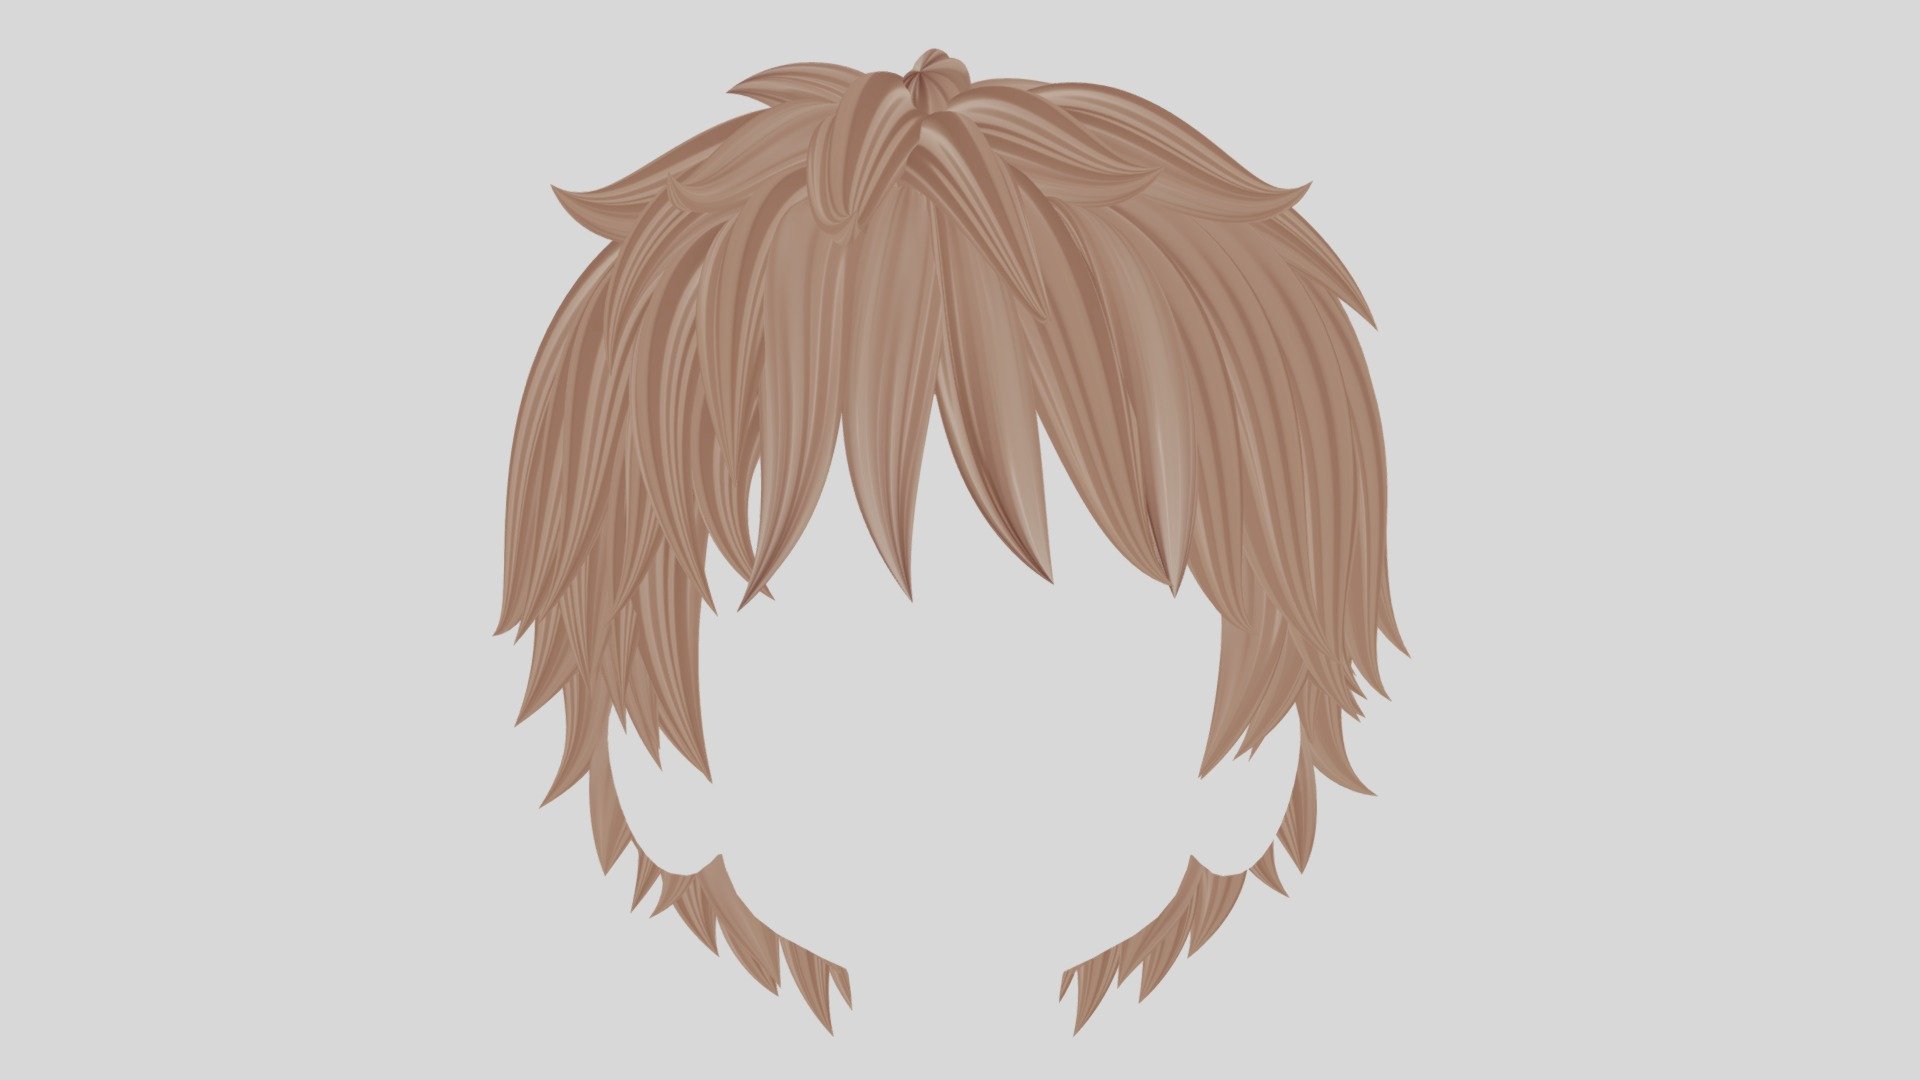 How to draw anime hair? by Haruta_ - Make better art